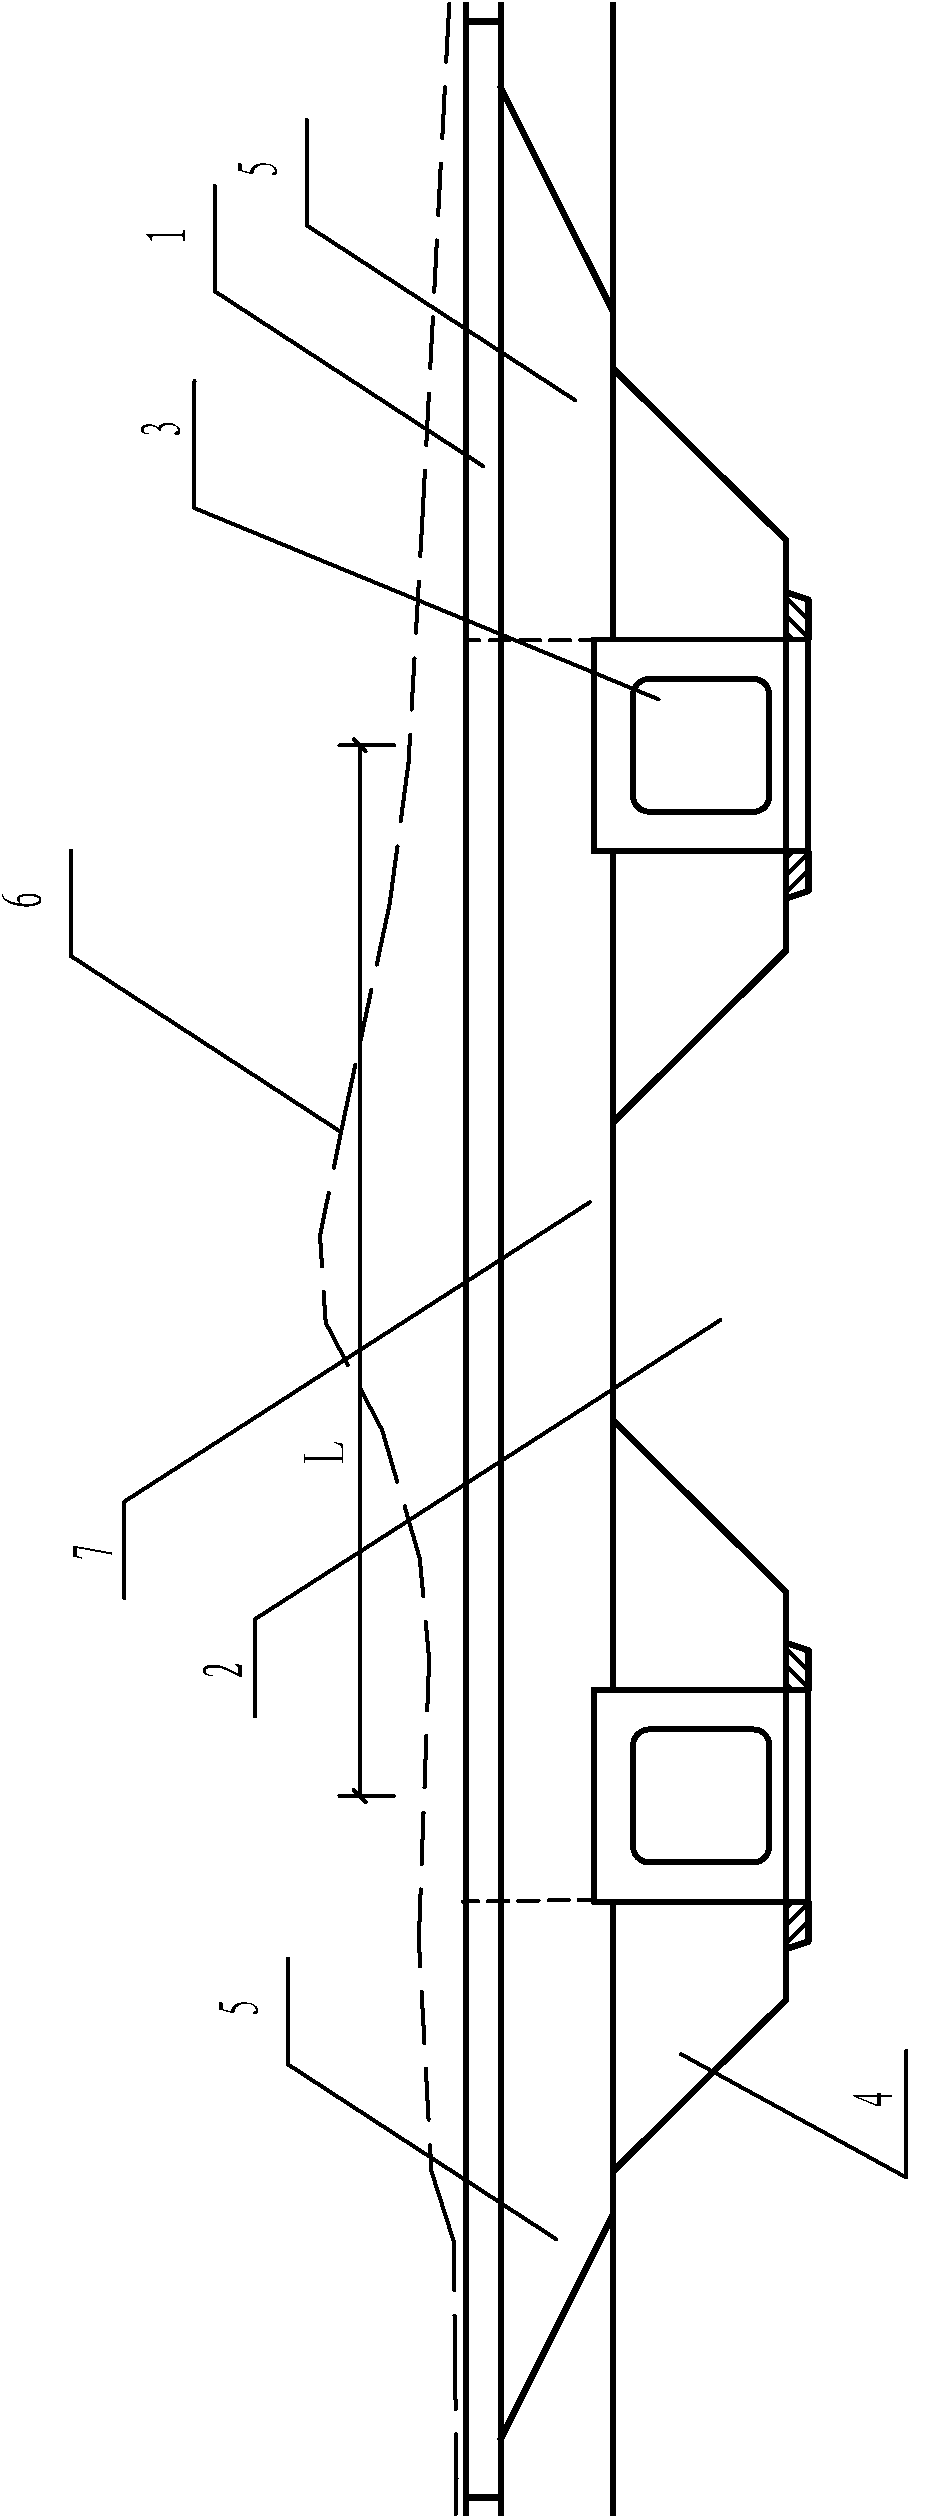 Short roadbed transition section structure between culverts of high speed railway